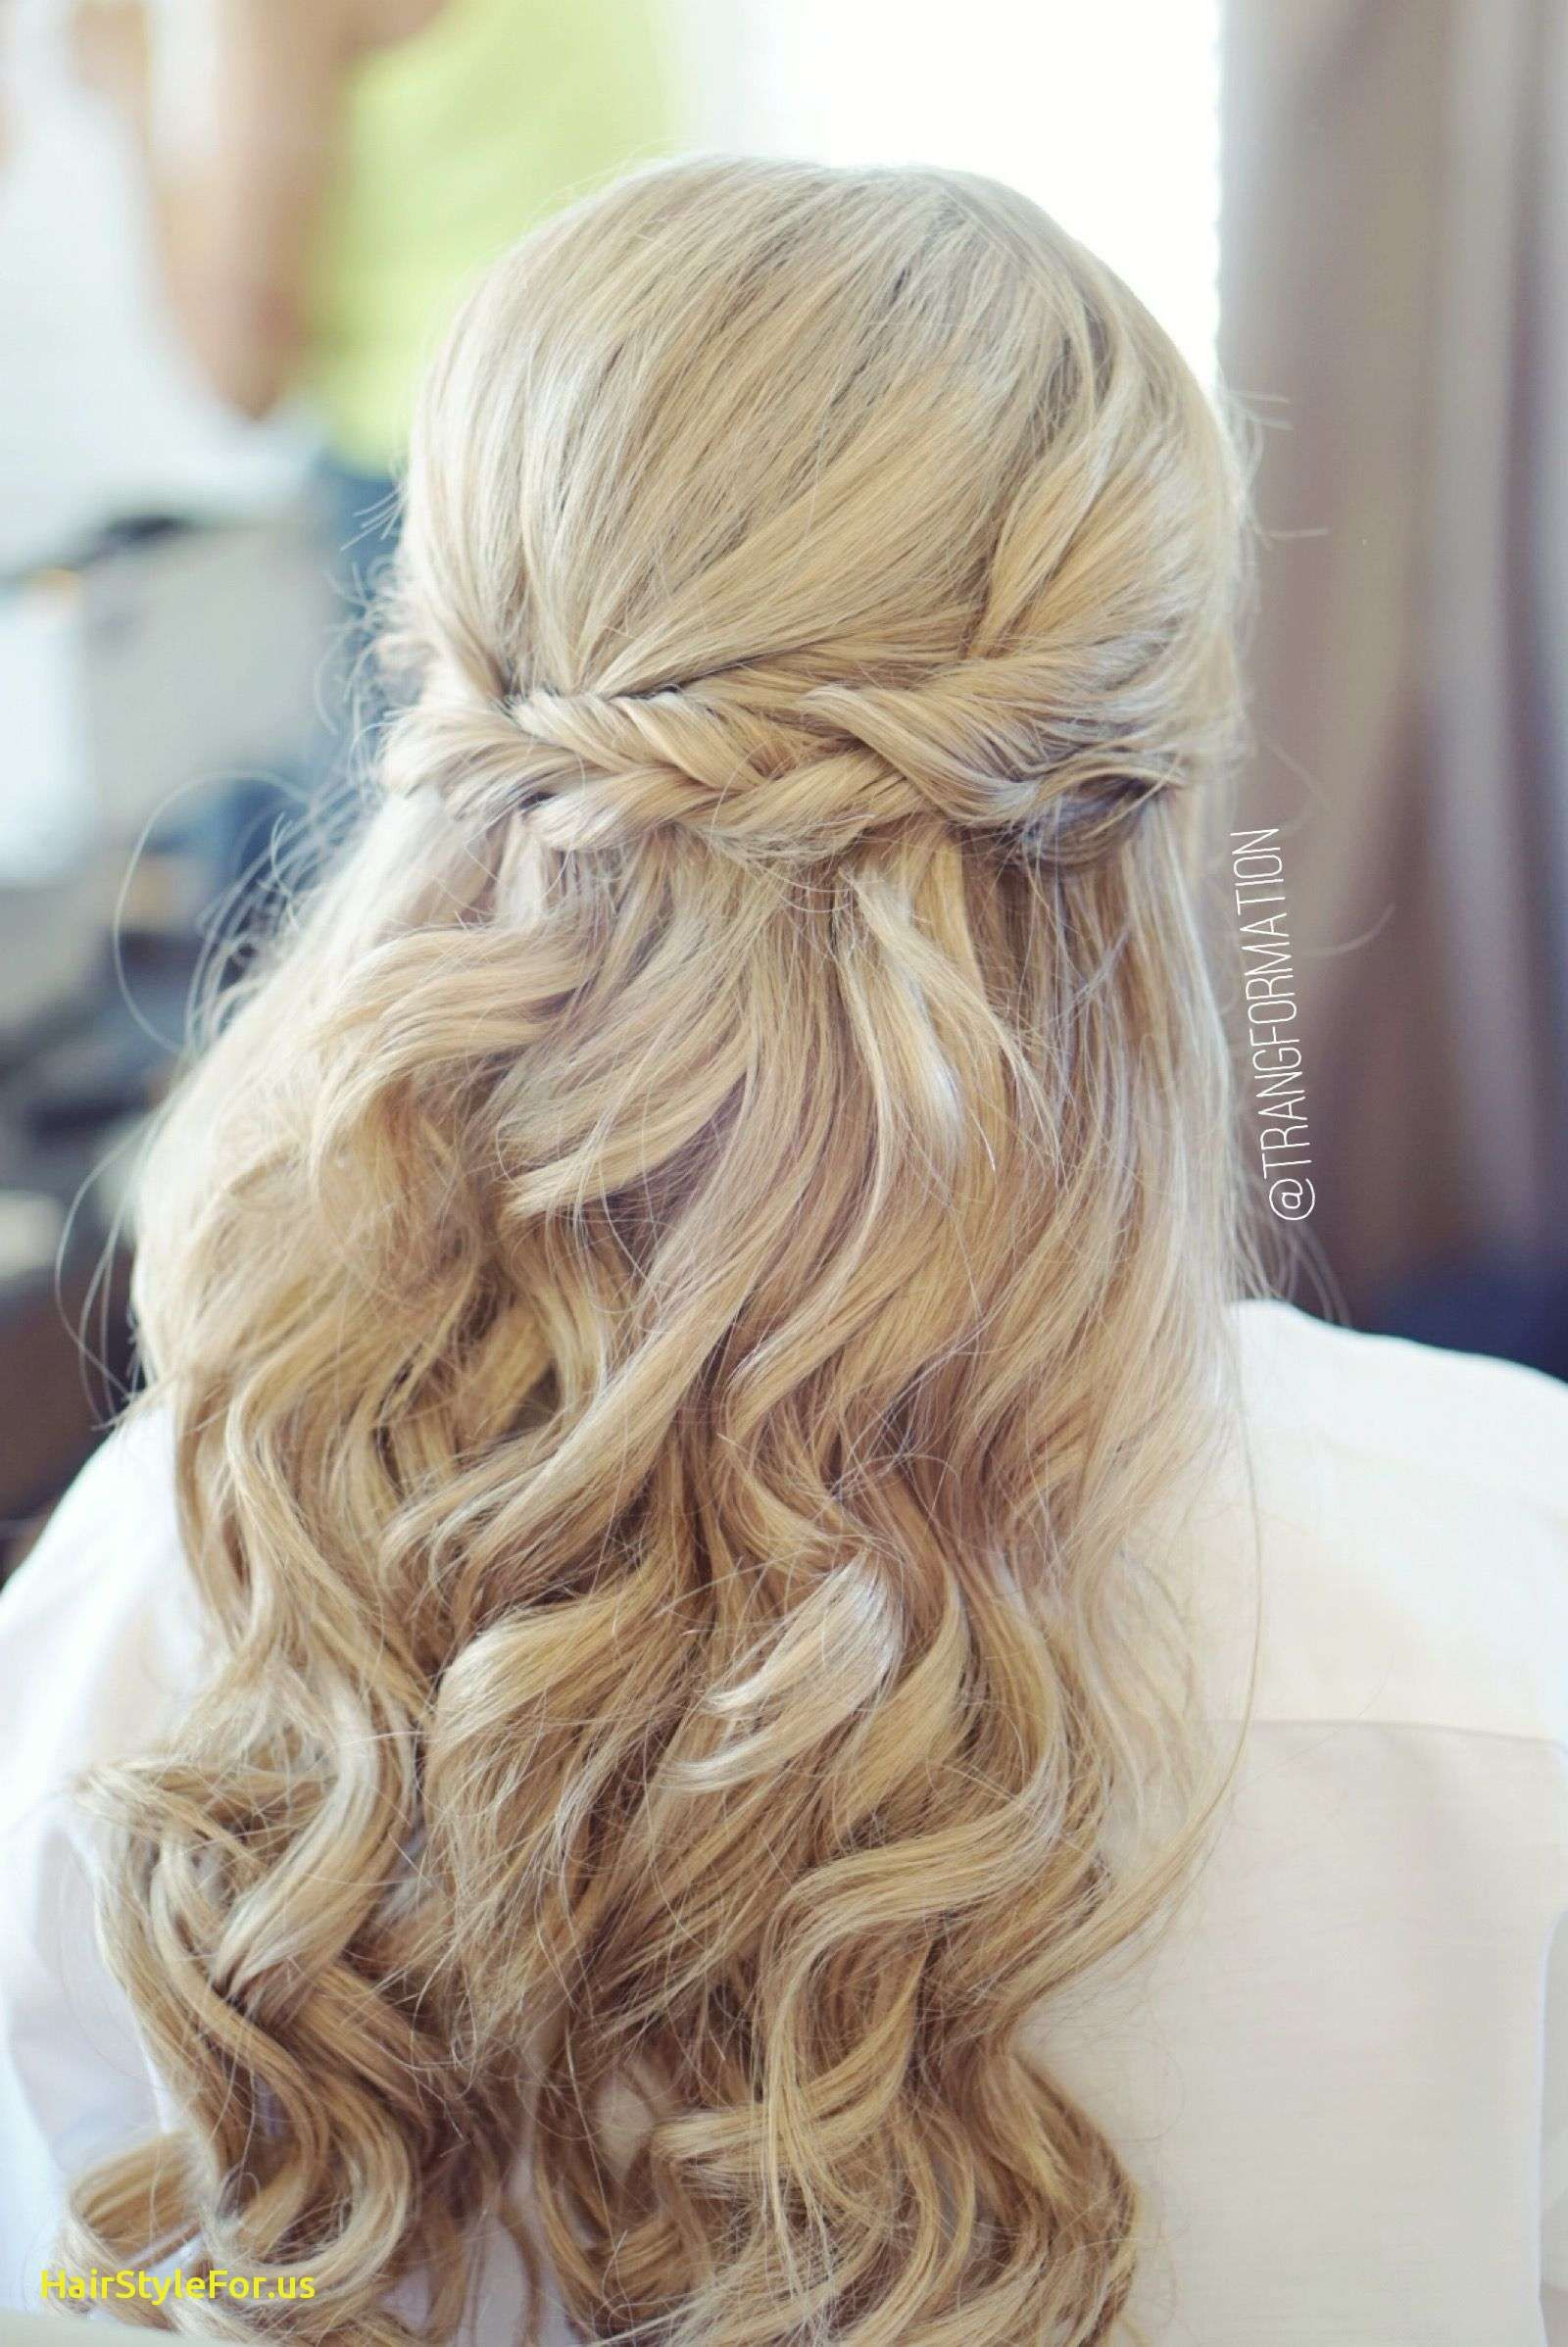 Country Wedding Hairstyles For Bridesmaids
 Inspirational Country Wedding Hairstyles for Long Hair